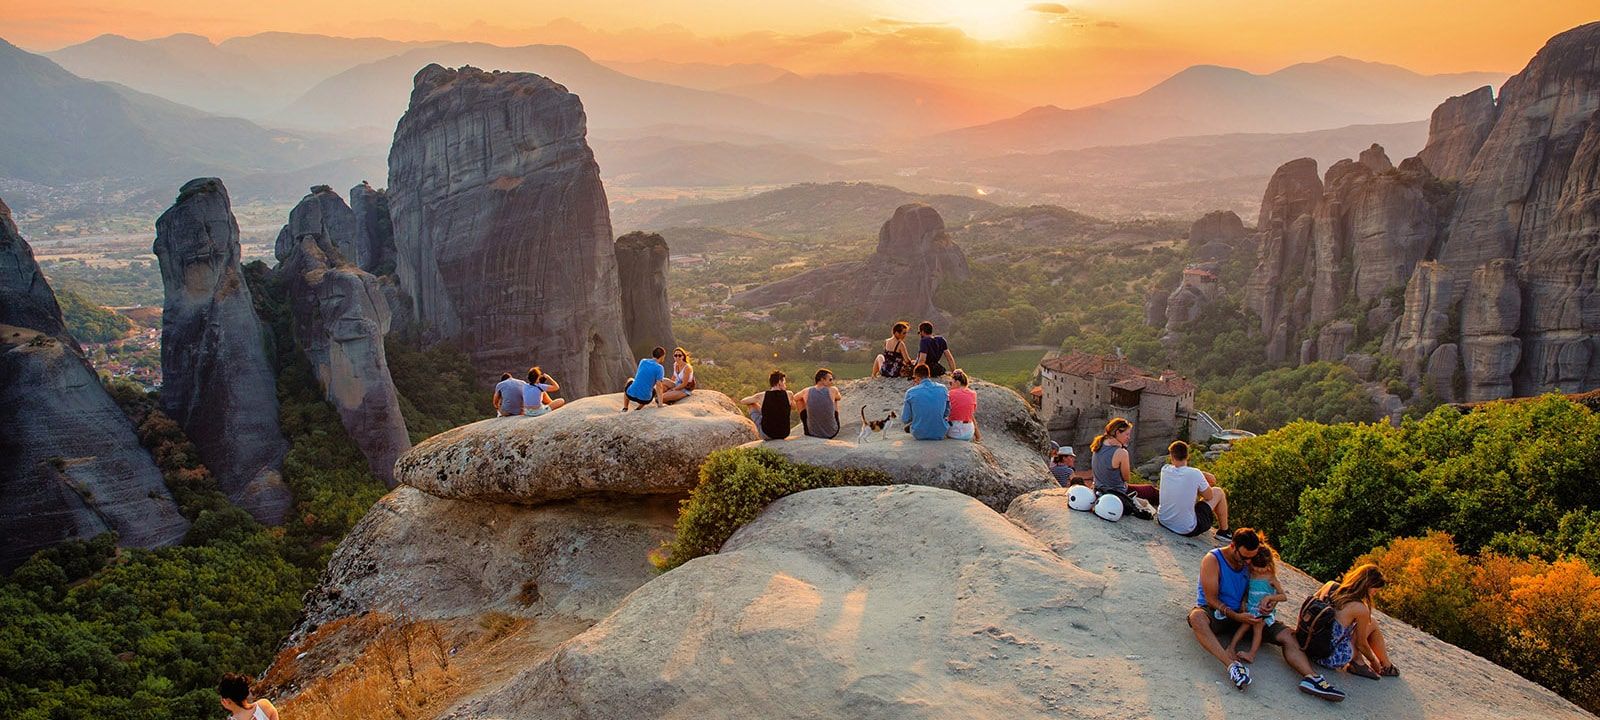 The destination of Meteora for an excursion with Greek Adventures